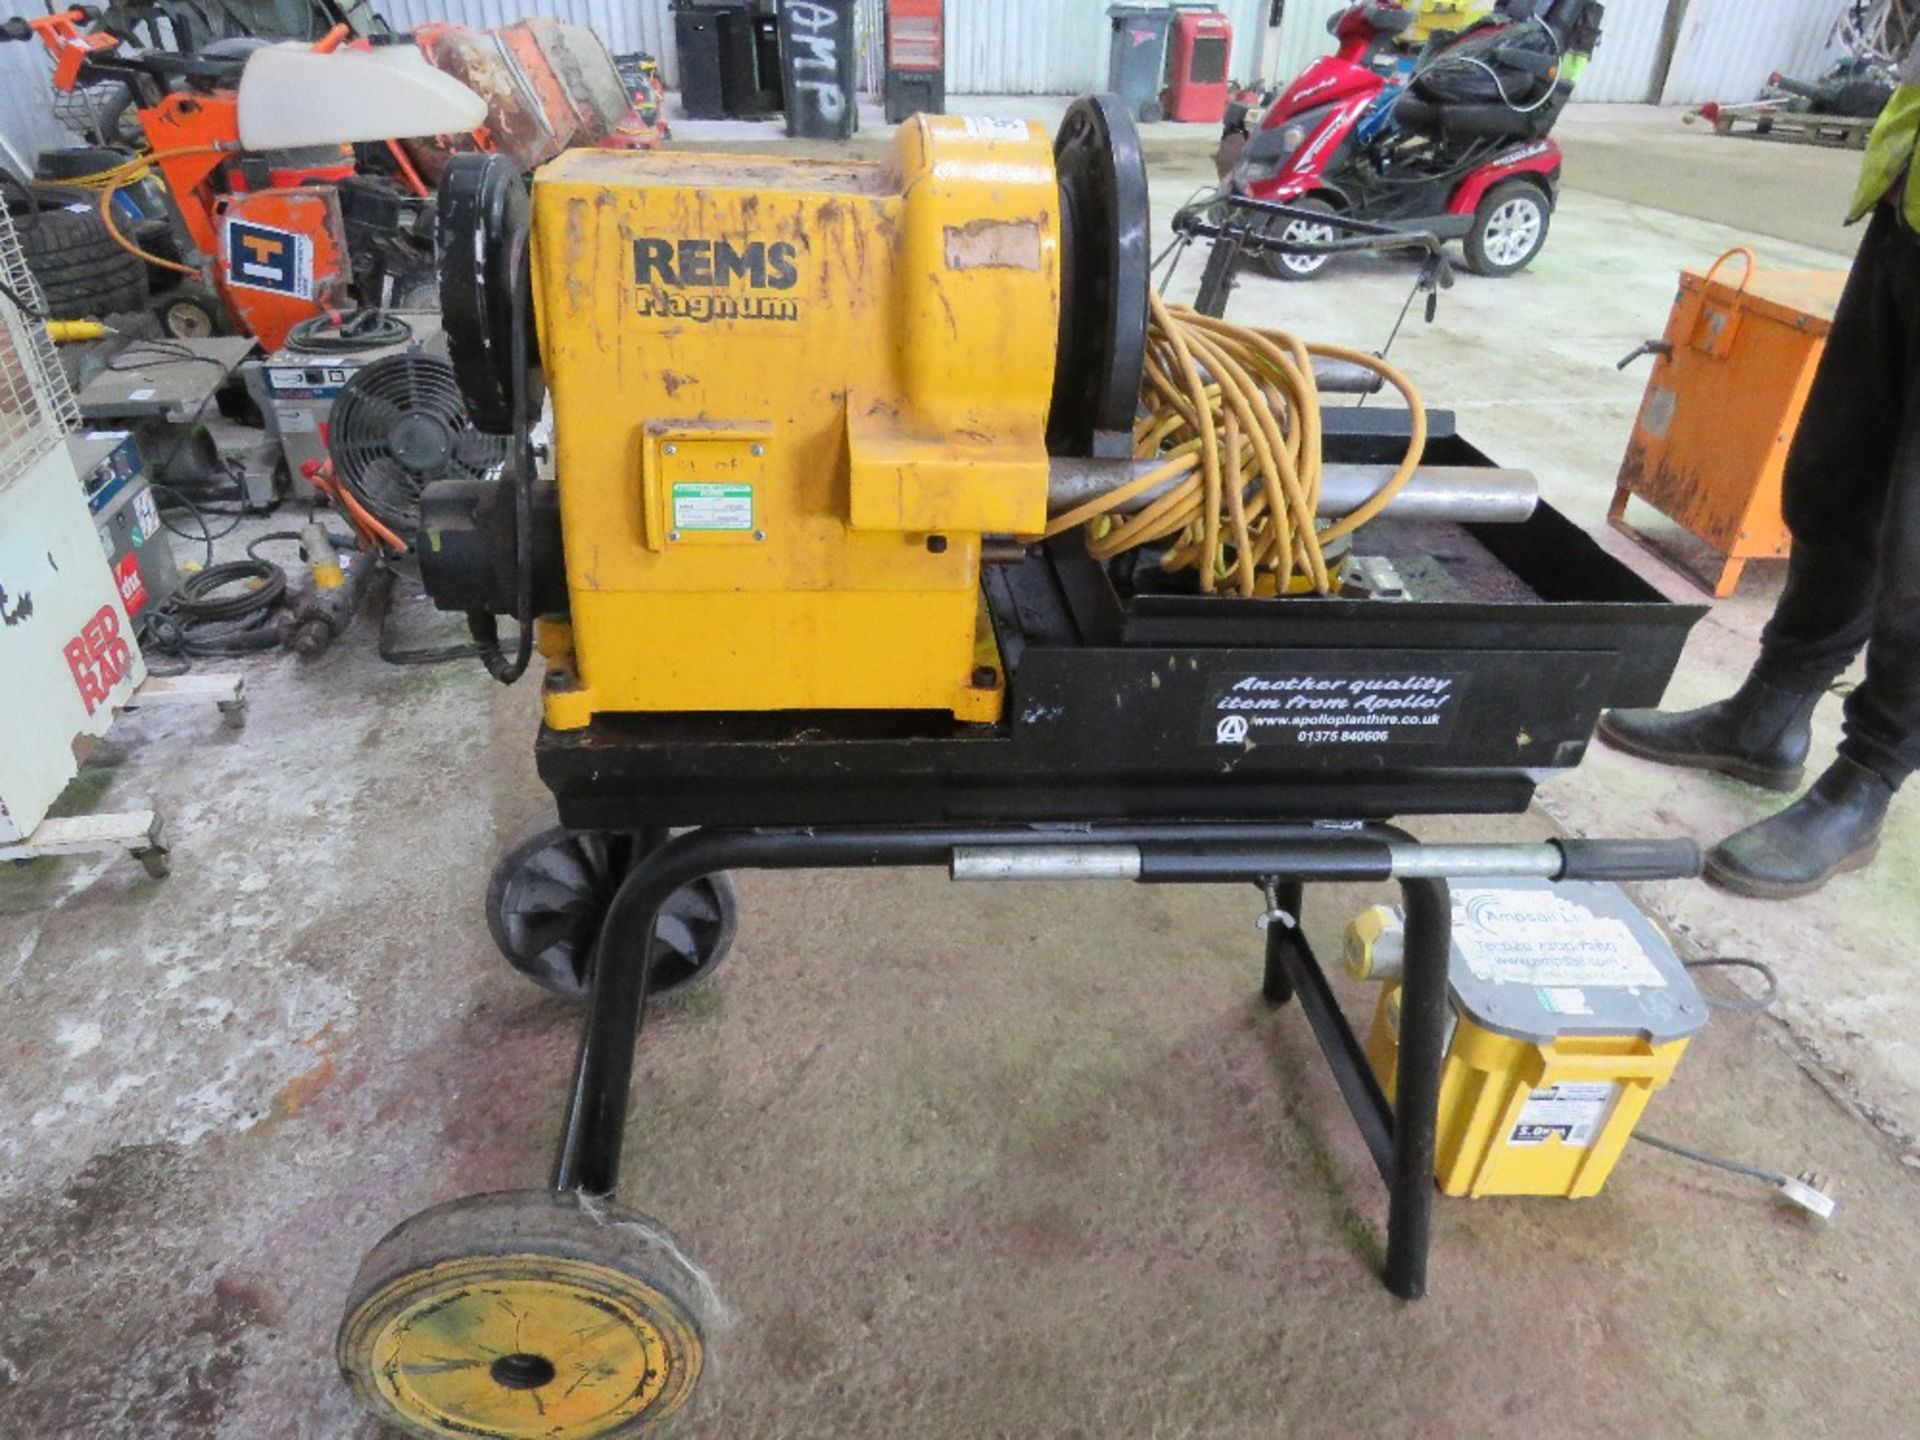 REMS MAGNUM 110VOLT PIPE THREADER UNIT ON A STAND WITH SOME ASSOCIATED EQUIPMENT AS SHOWN AND A TRAN